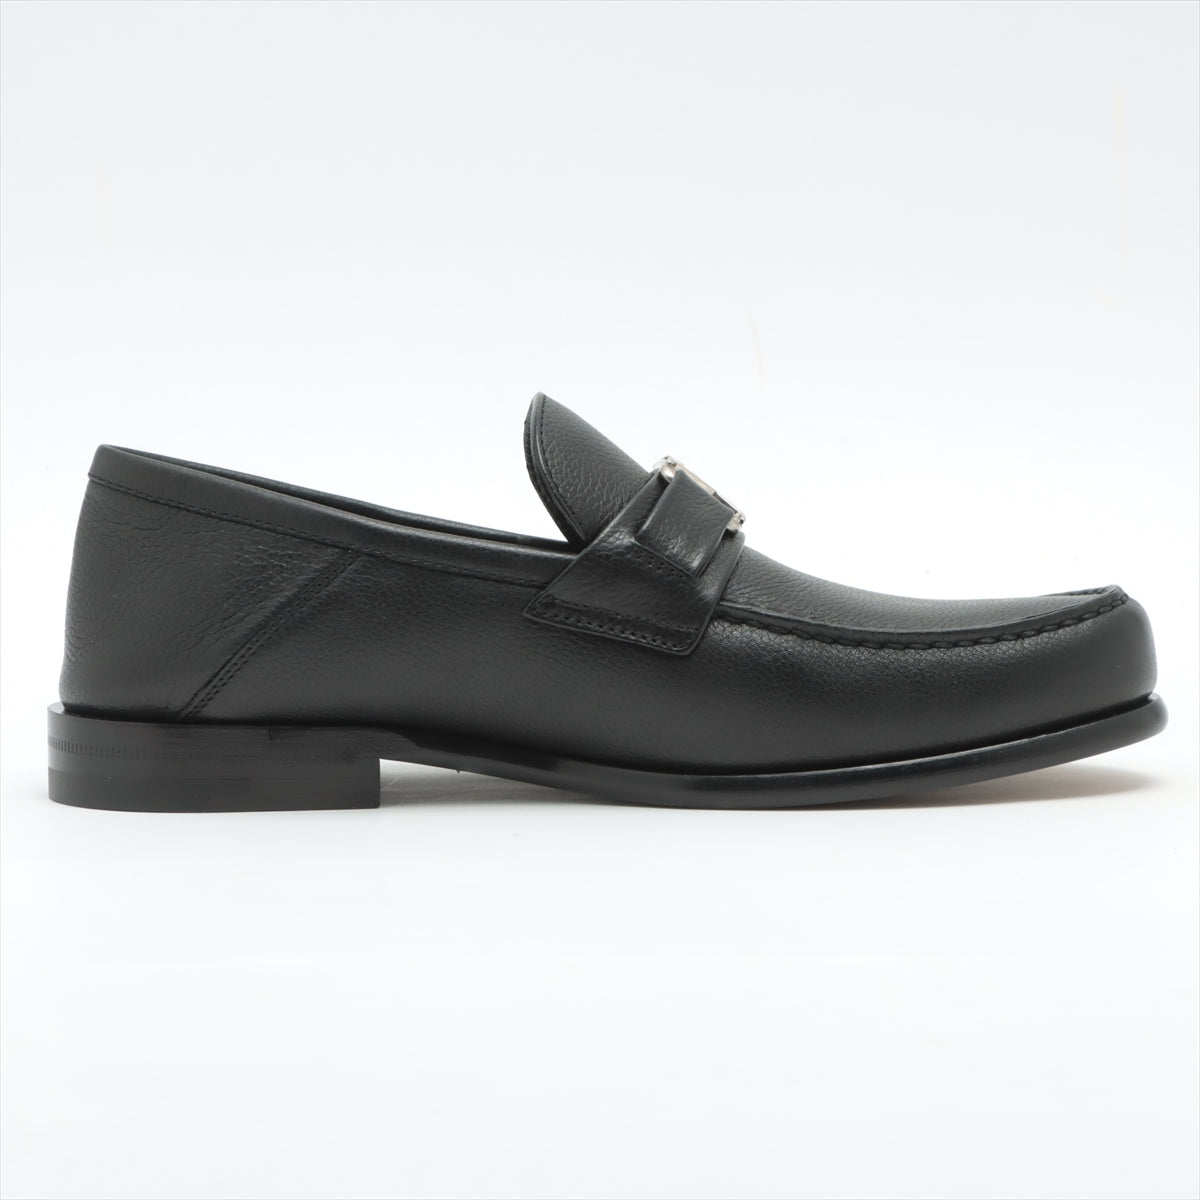 Louis Vuitton Major line 20 years Leather Loafer 5 1/2 Men's Black FA0260 monogram brushed insole There is a box